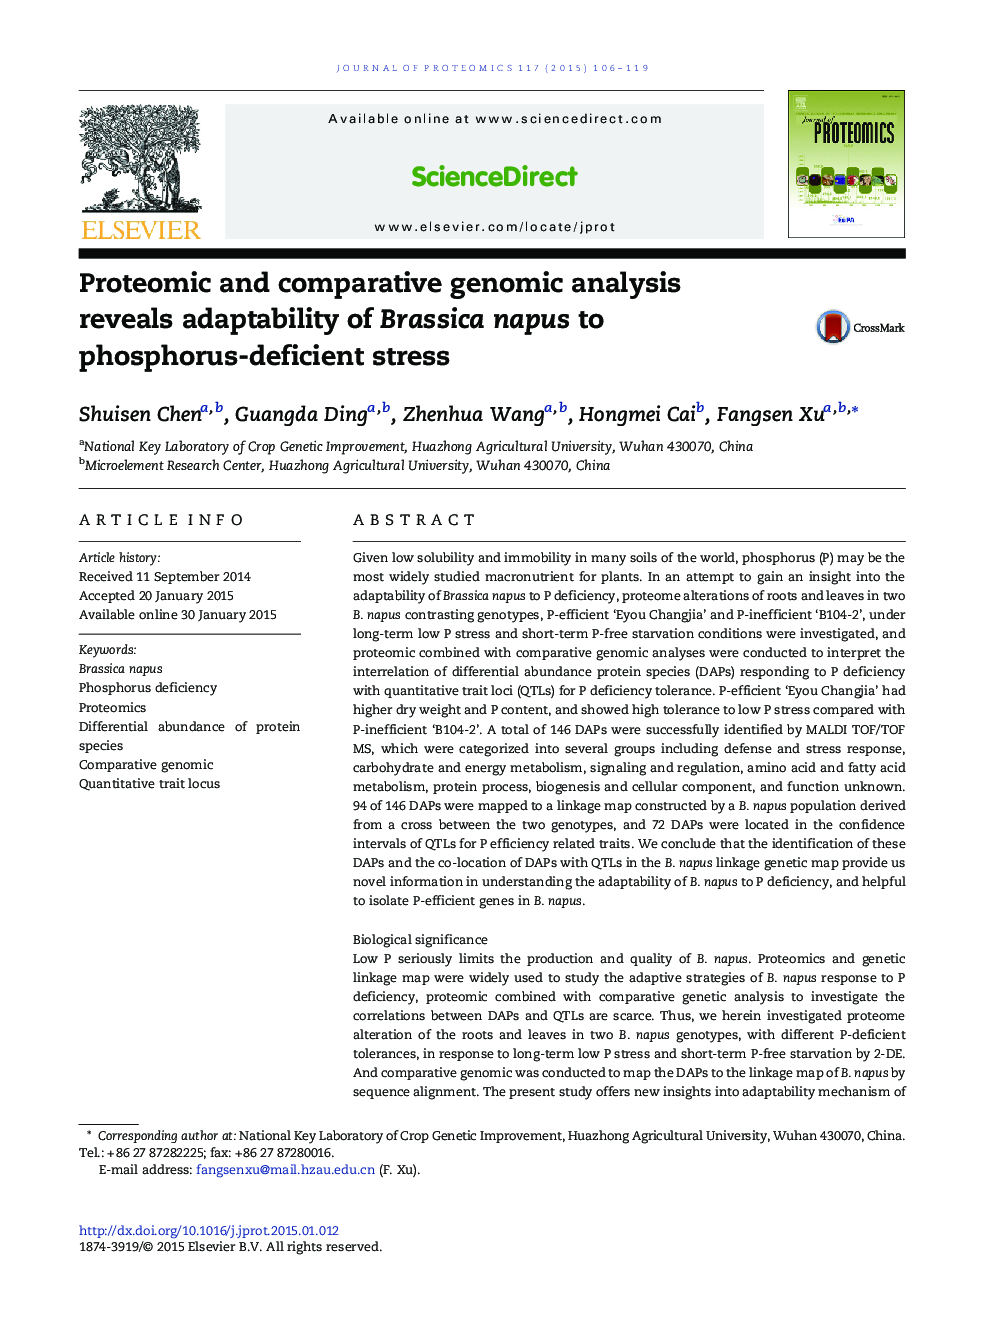 Proteomic and comparative genomic analysis reveals adaptability of Brassica napus to phosphorus-deficient stress